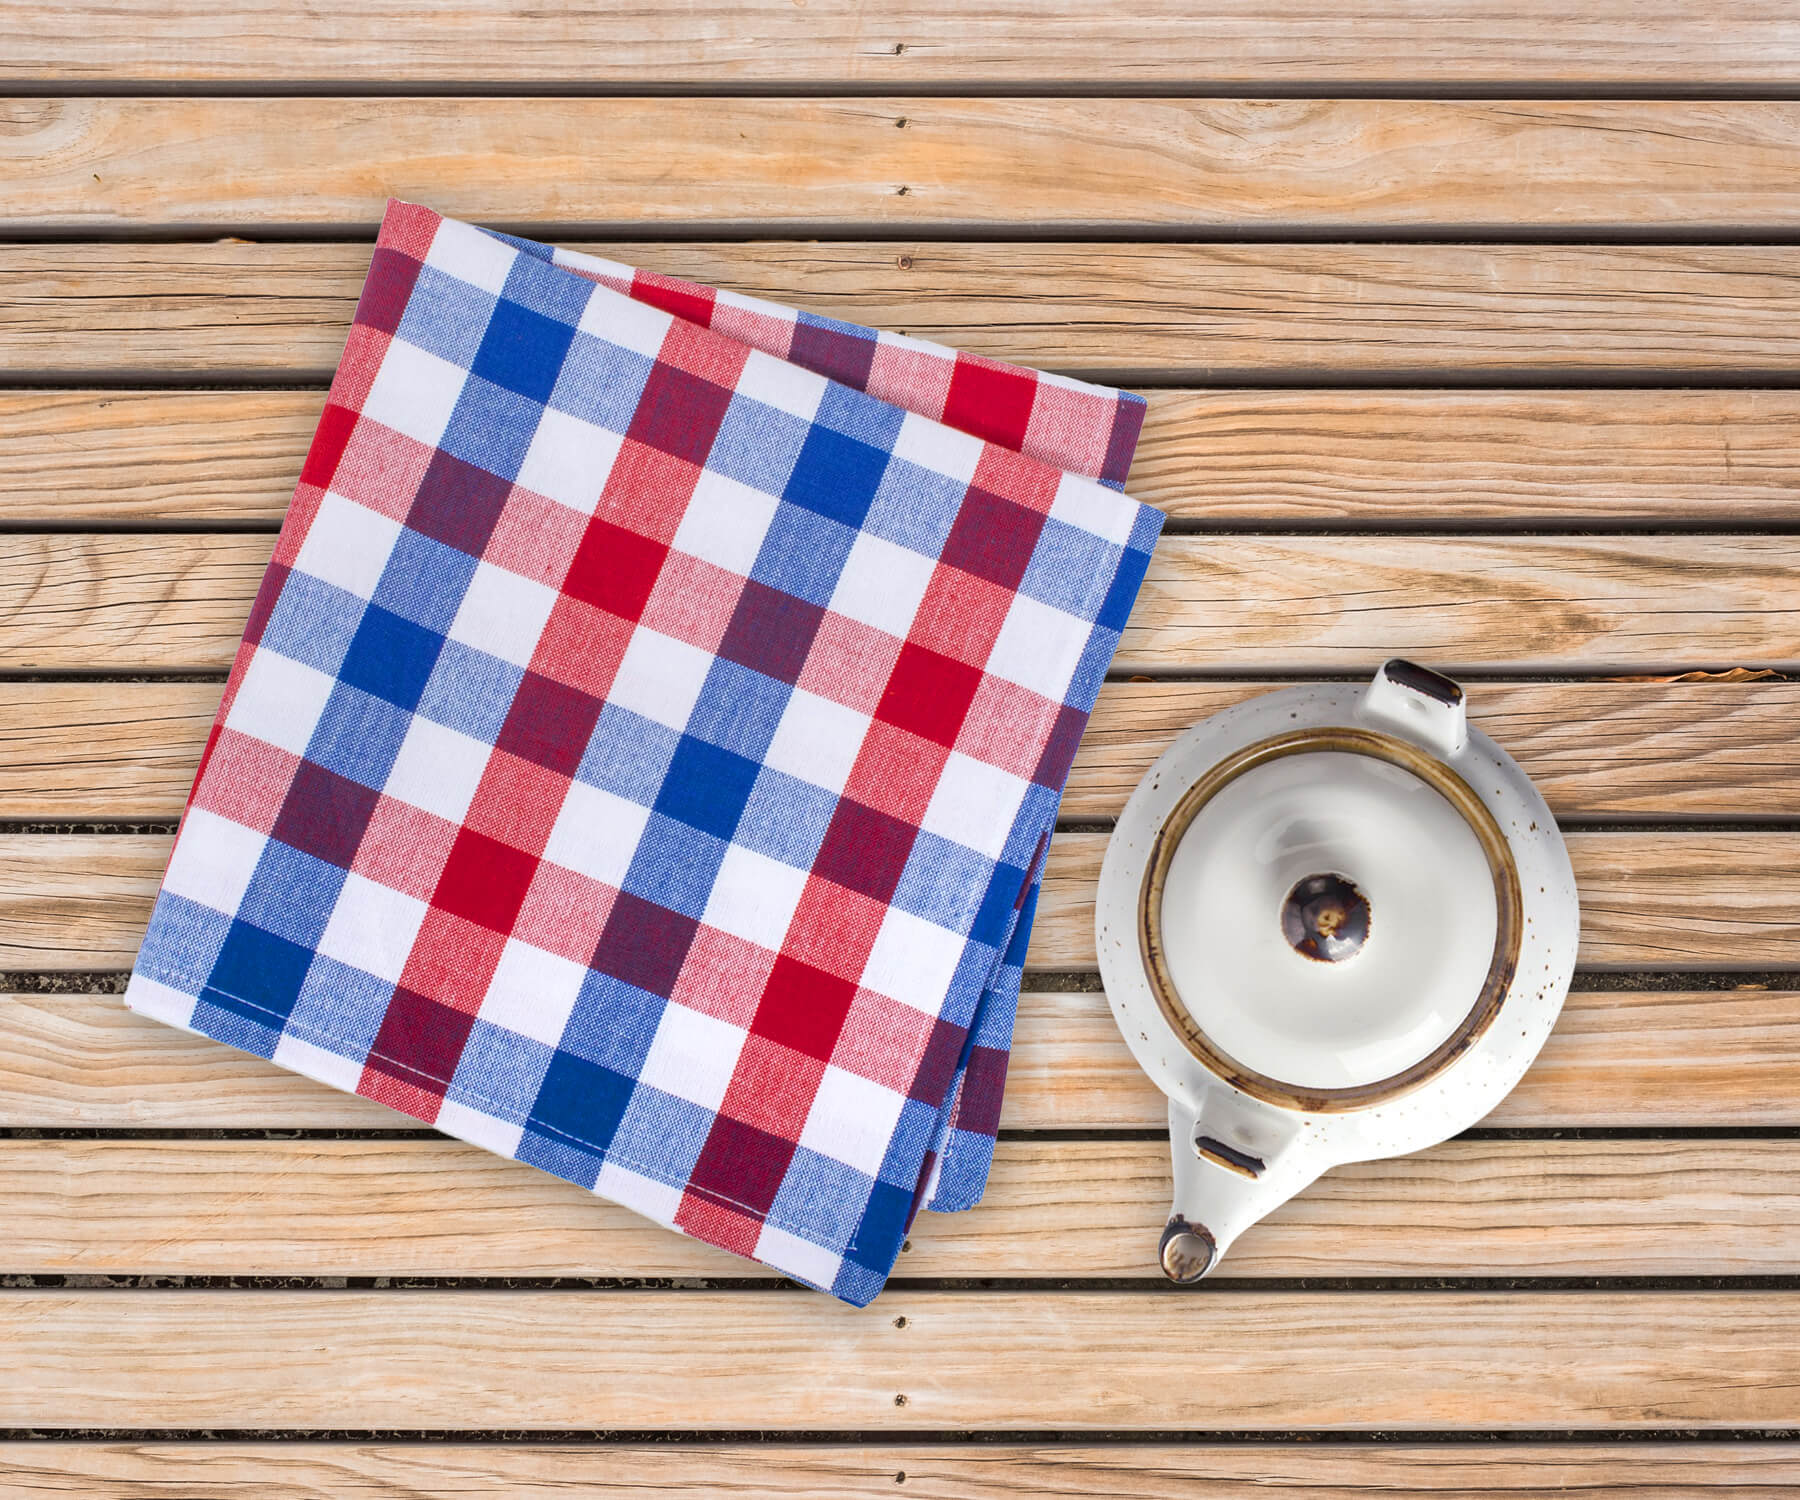 Blue tea towels are a classic kitchen essential that can be used for drying dishes, wiping counters, or even as a potholder.